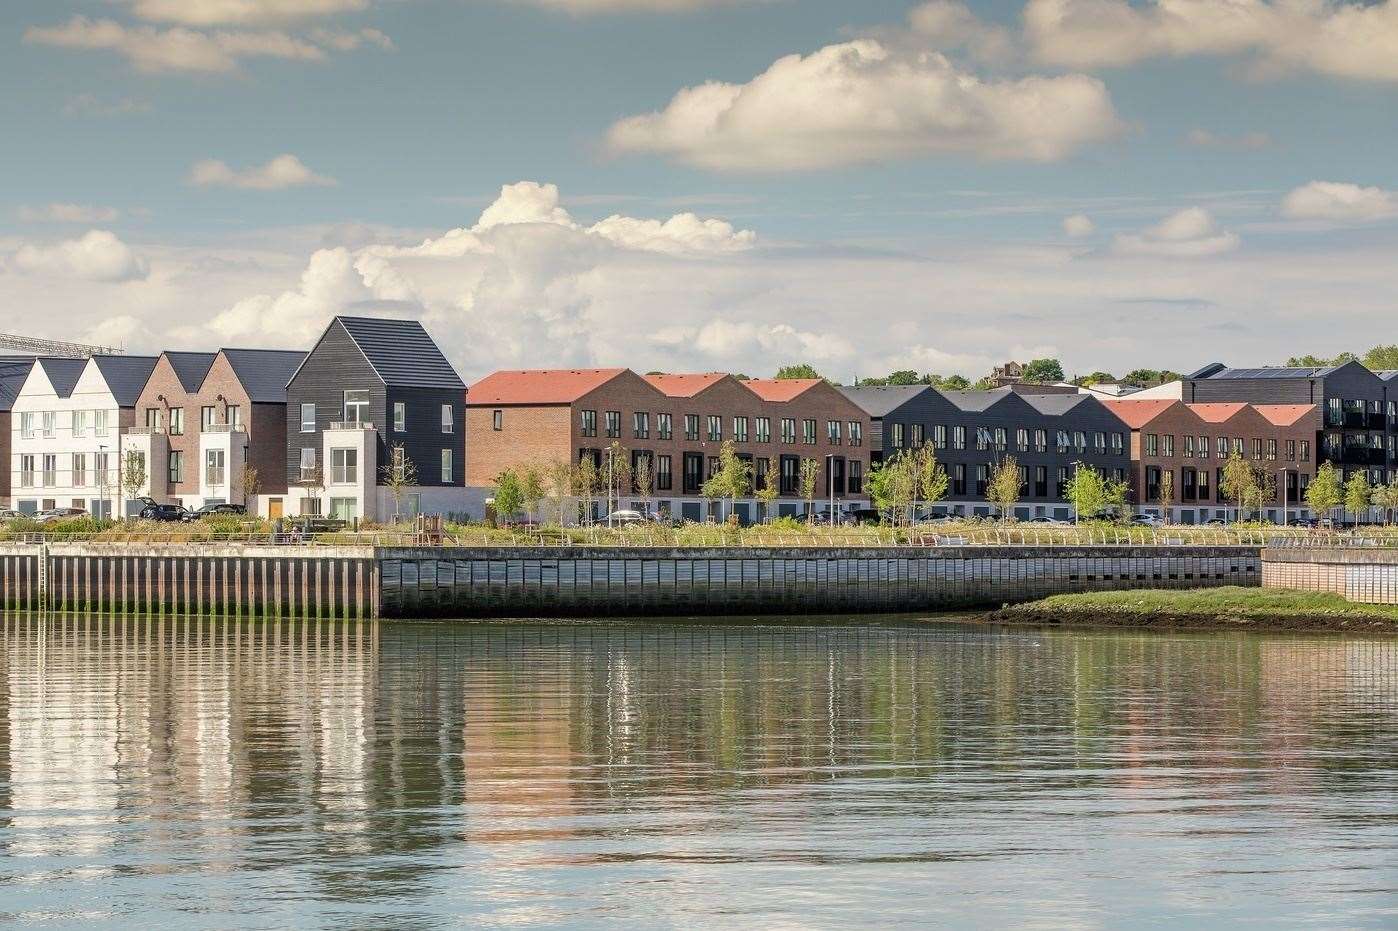 Rochester Riverside is a sought-after location